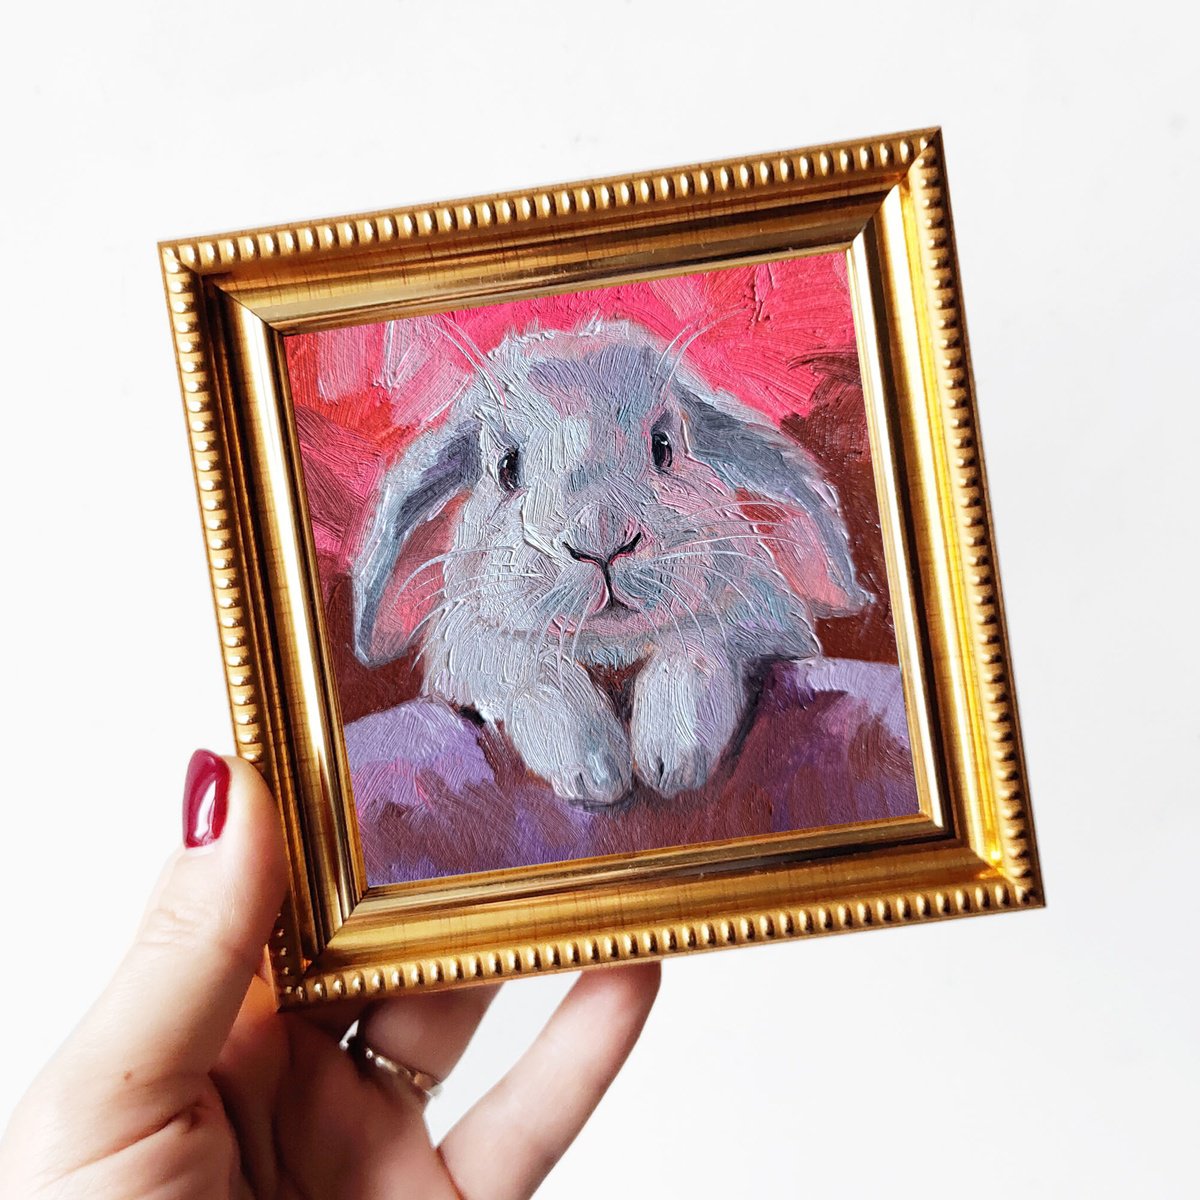 Rabbit painting original framed 4x4, Small painting hot pink cute rabbit artwork by Nataly Derevyanko